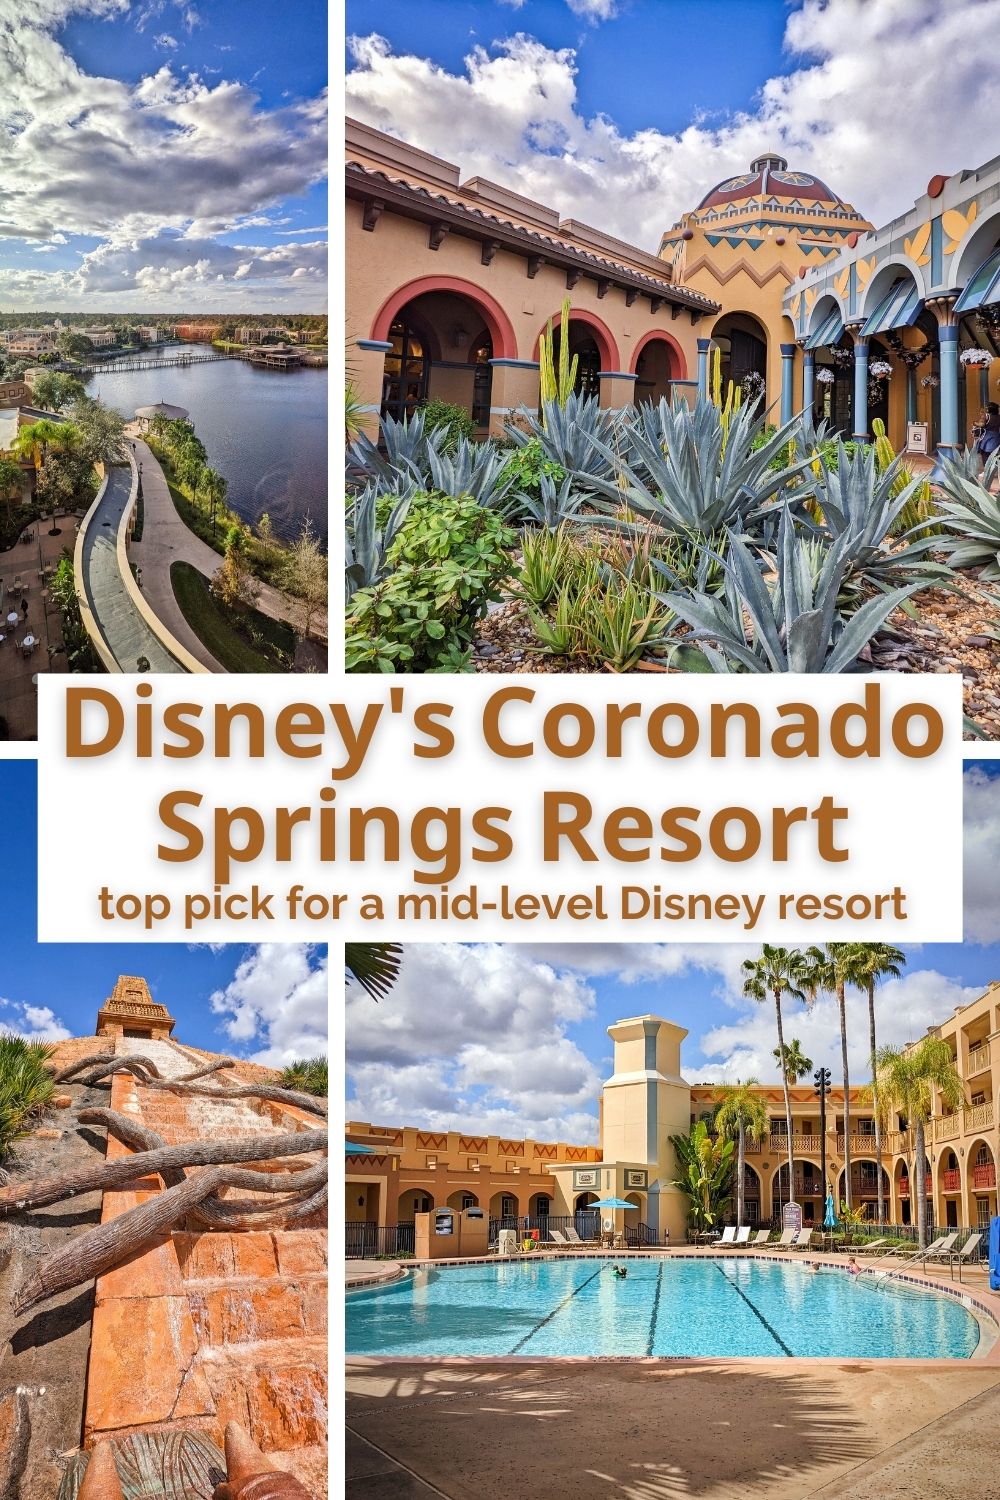 Disney's Coronado Springs Resort is a very different Walt Disney World Hotel. It feels unlike other Disney properties while still having the Disney touches and service. Review of Coronado Springs includes dining, transportation and more.